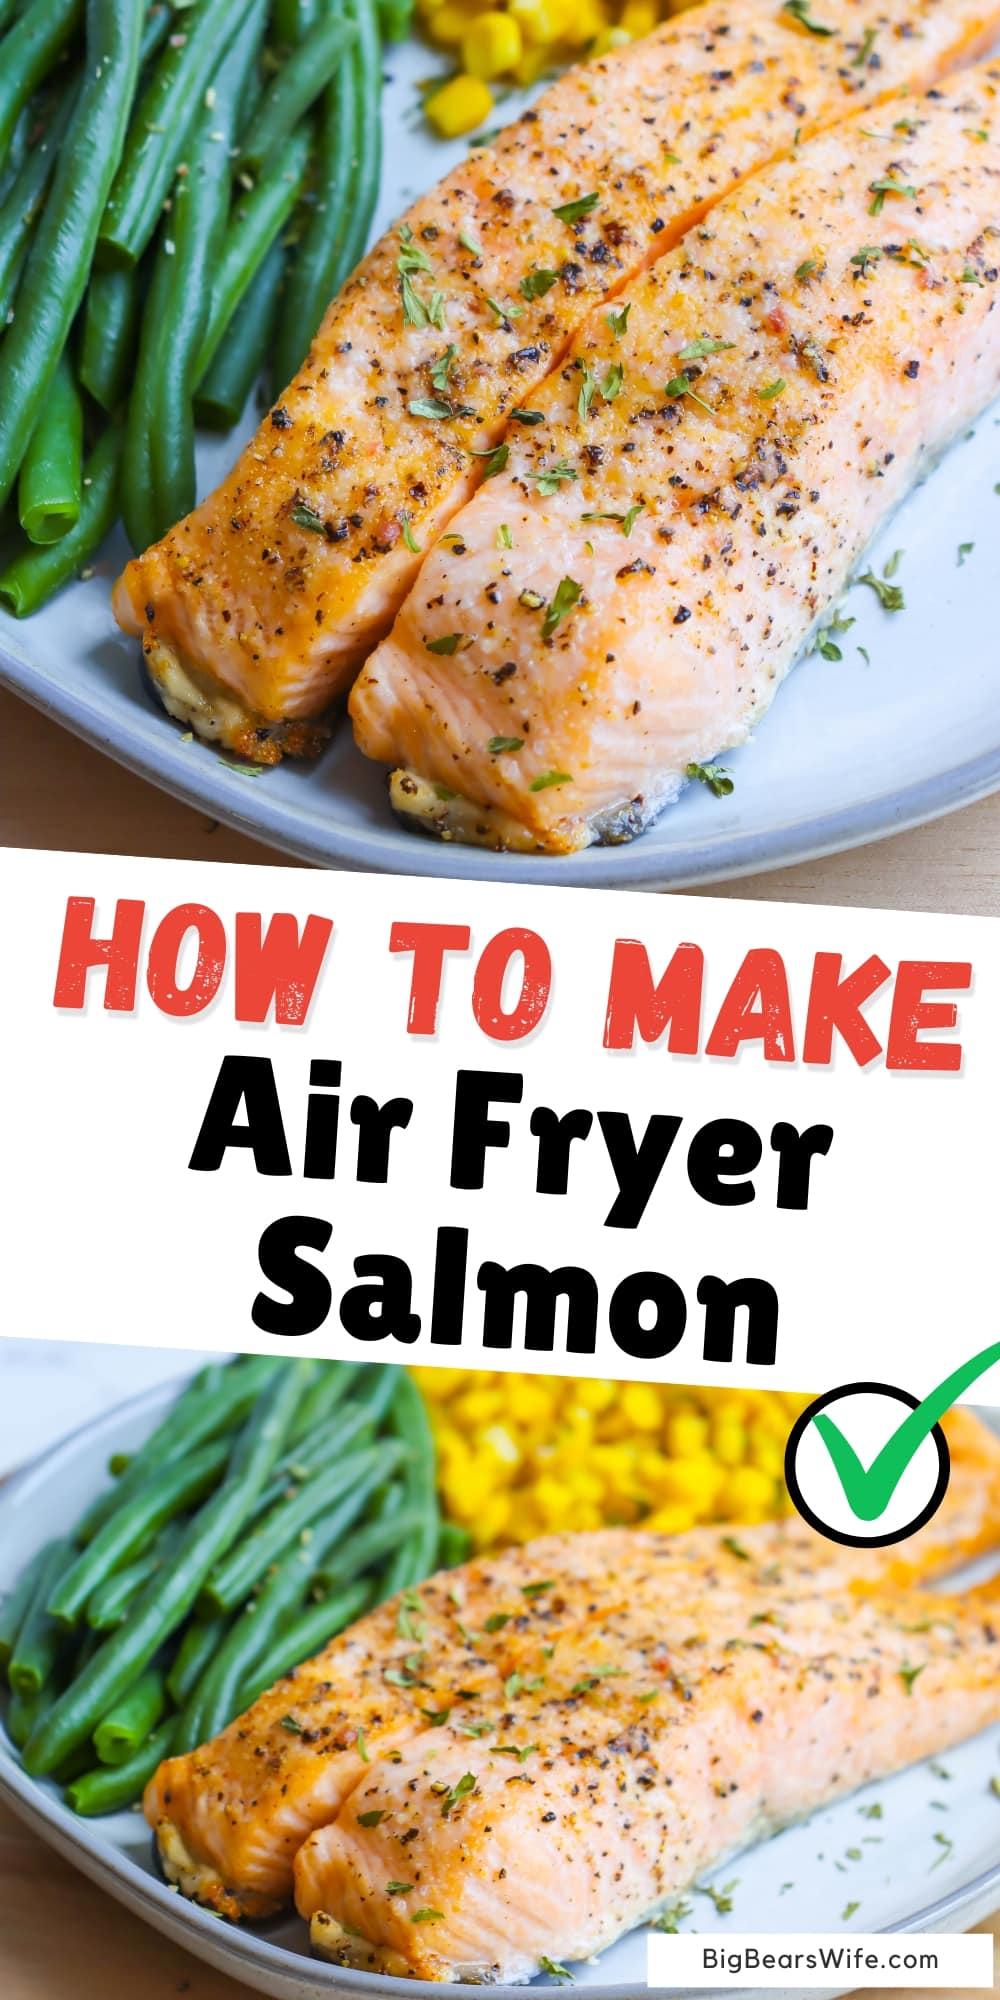 Air Fryer Salmon is so quick and easy to make. Air Fryer Salmon can be made in about 10 minutes and is perfect for a quick weeknight meal or easy weekend lunch! via @bigbearswife